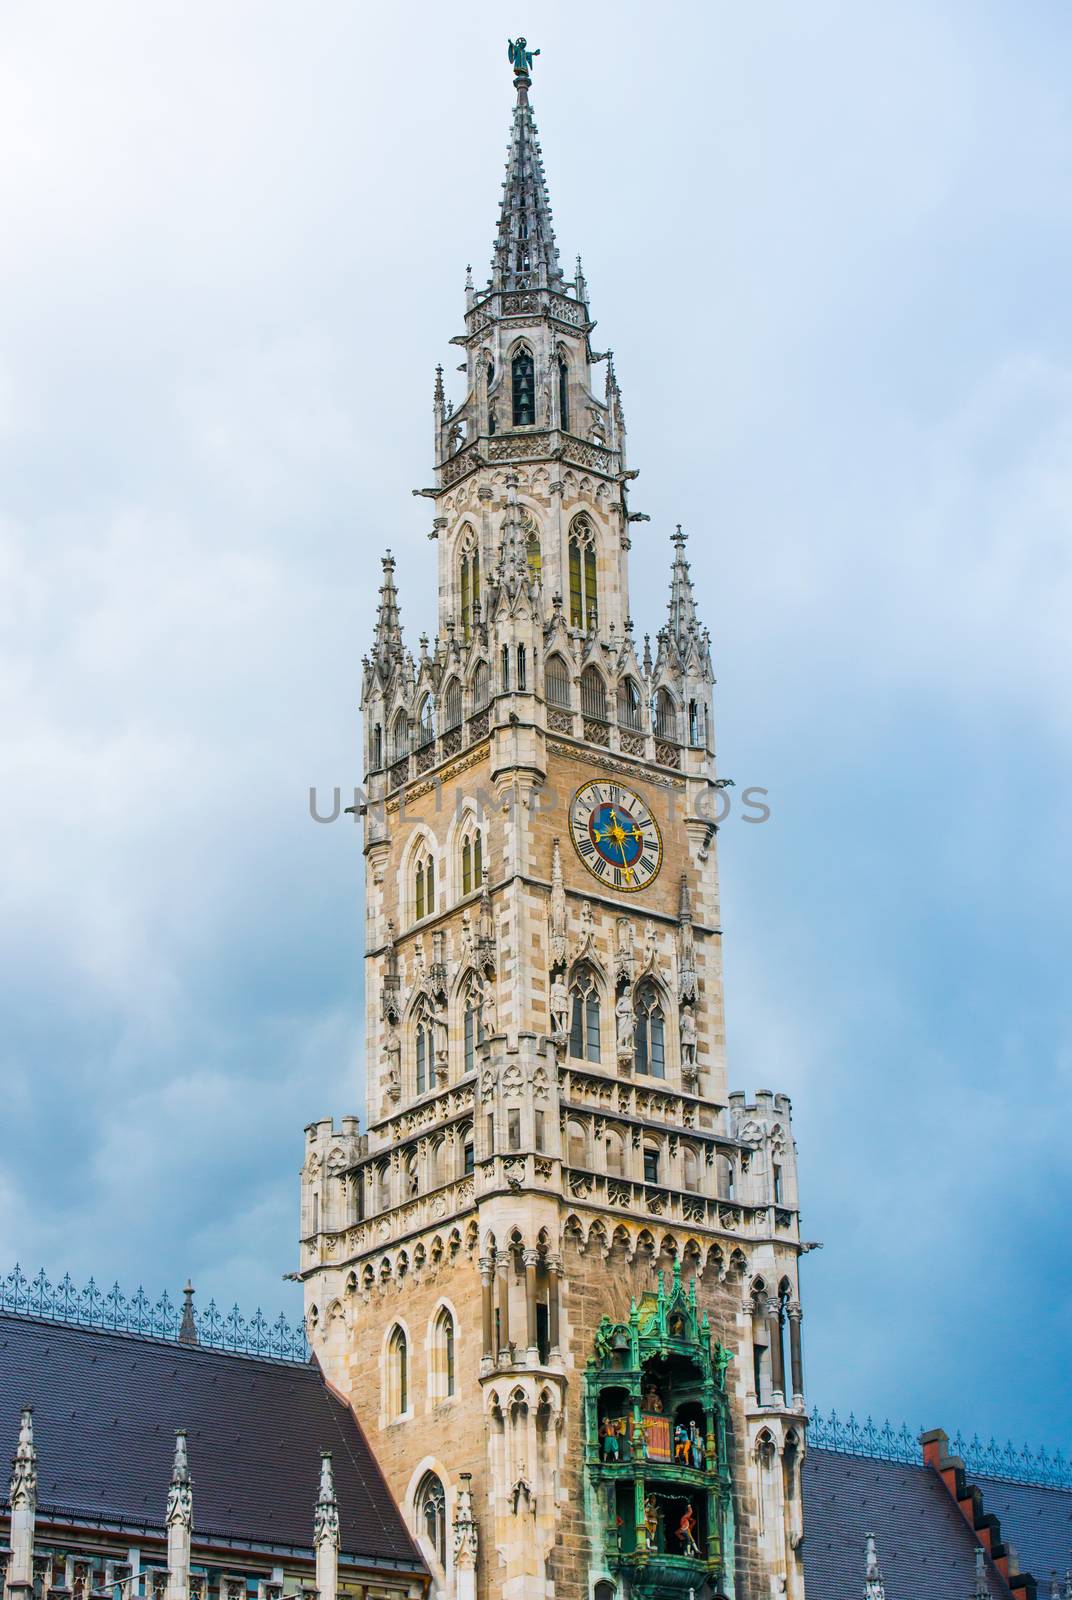 New Town Hall in Munich